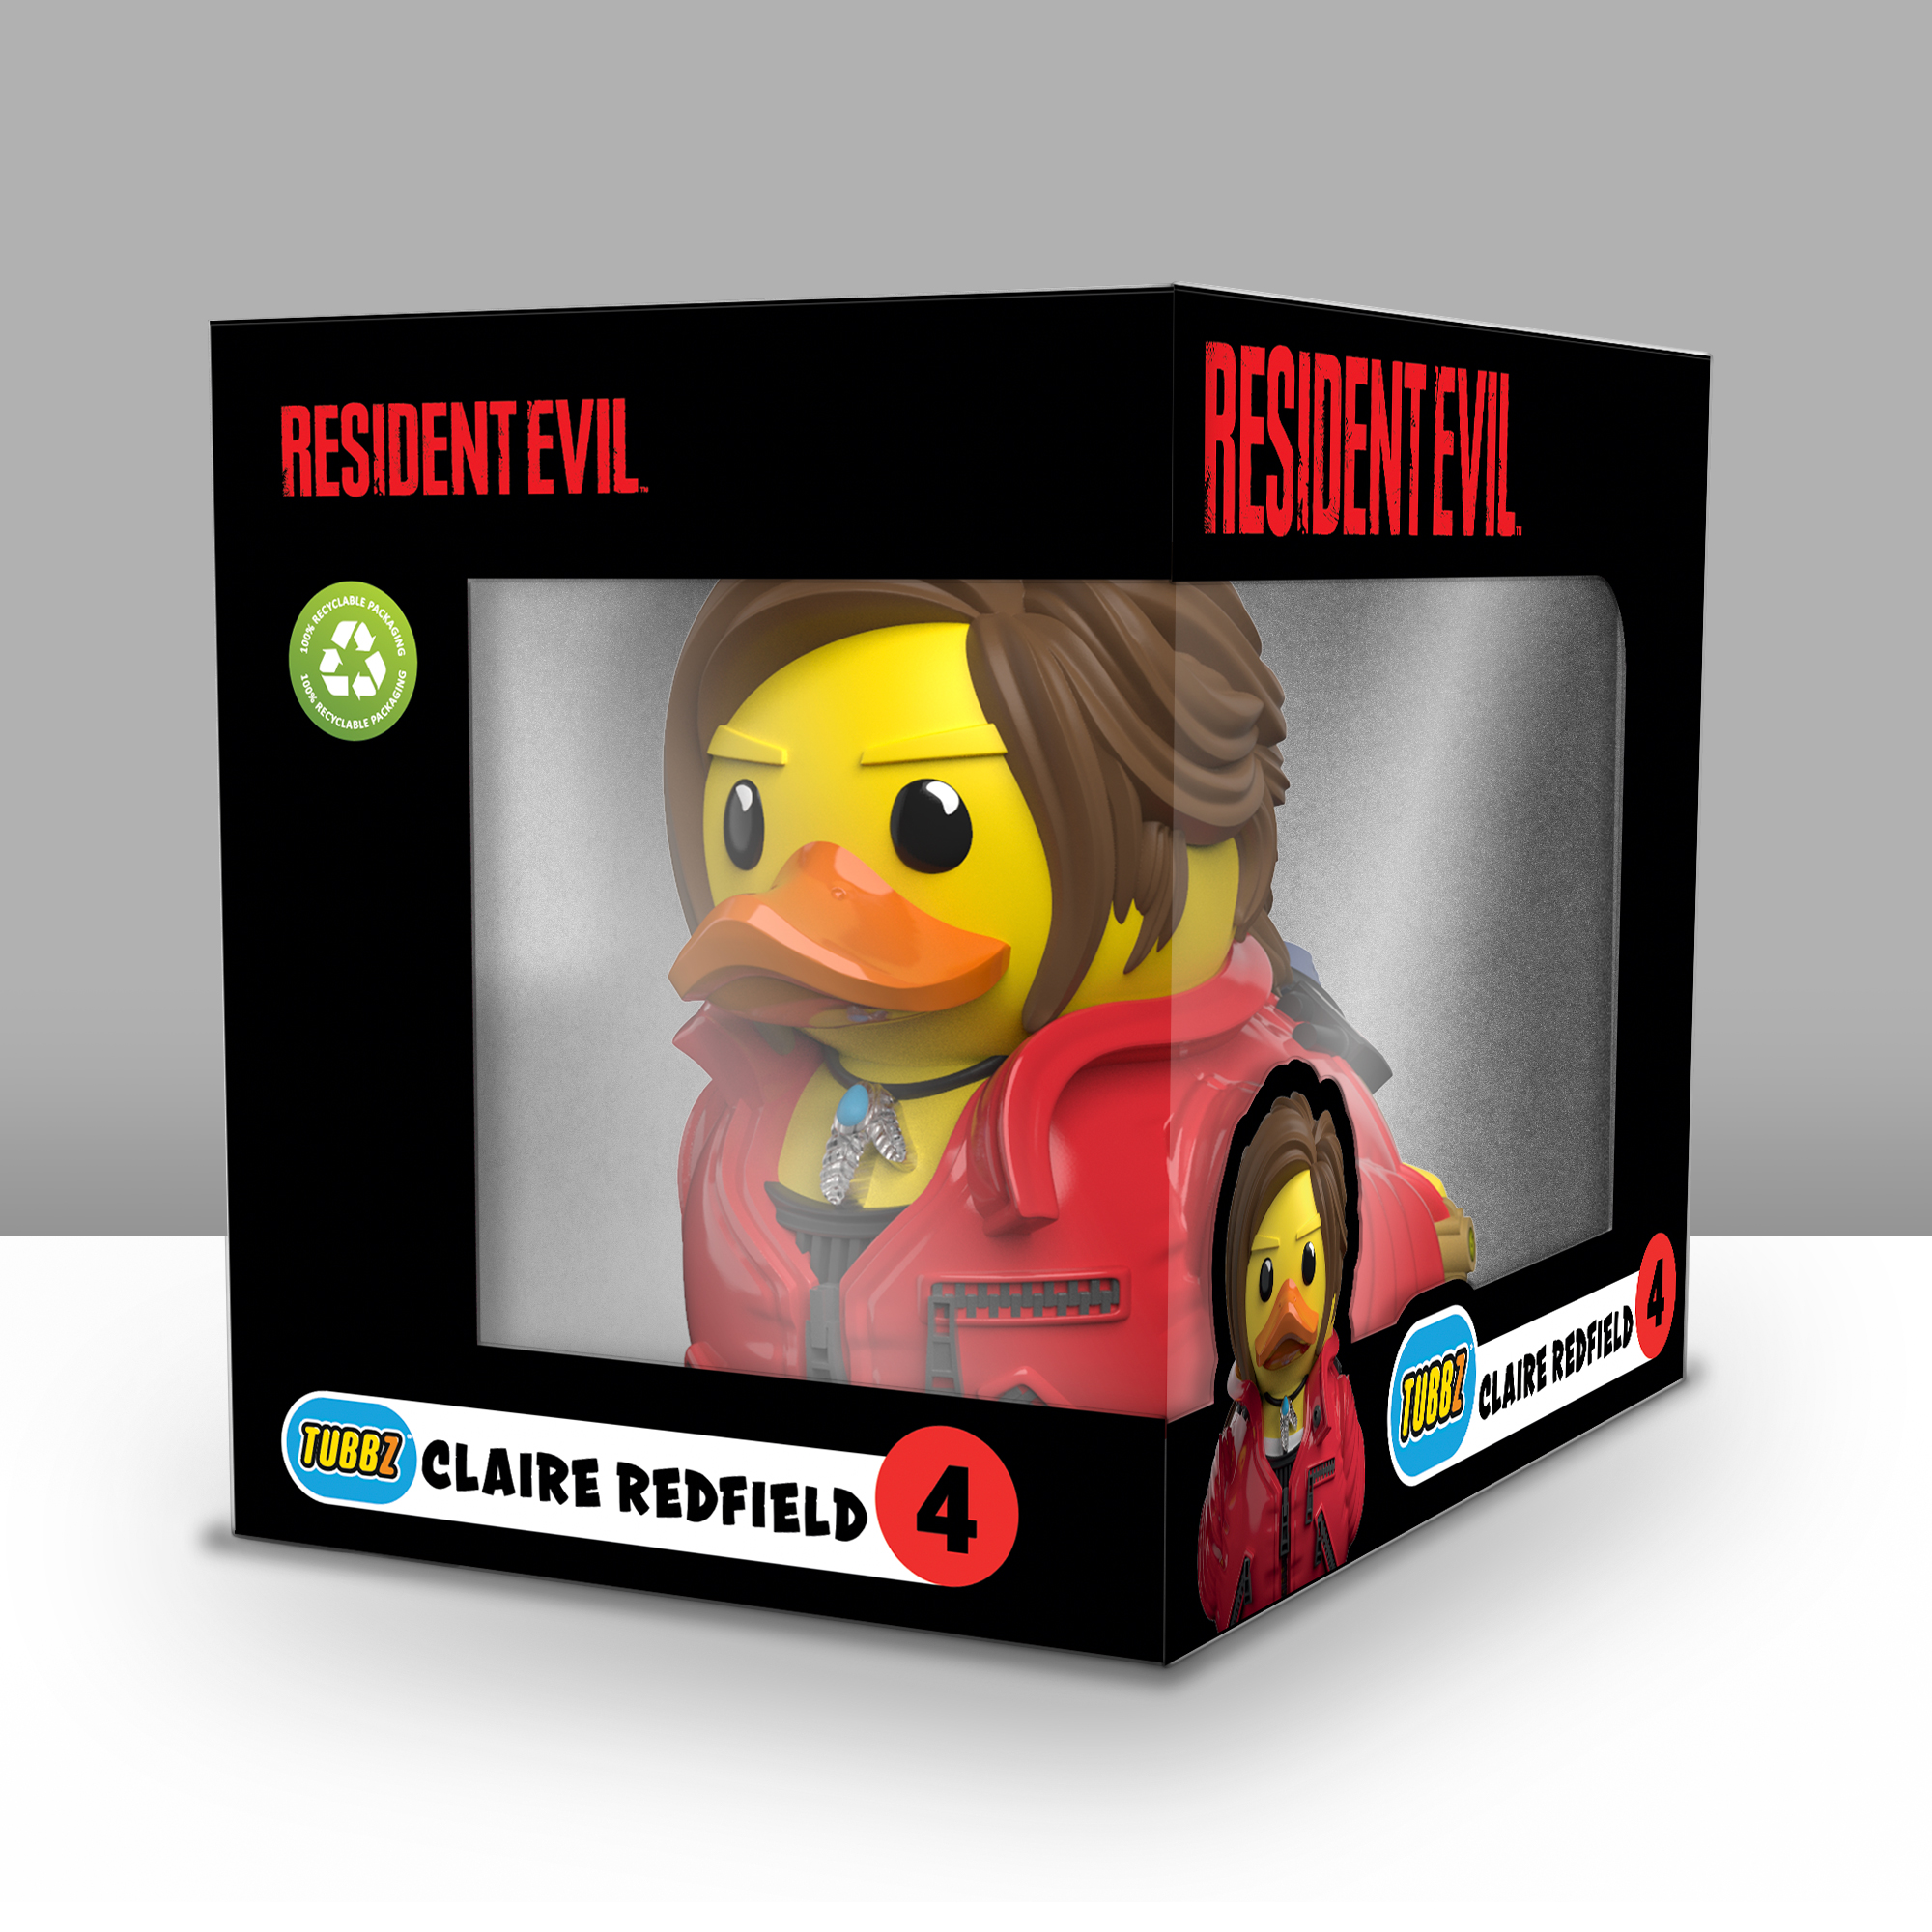 [Pre-order] TUBBZ BOX EDITION "Resident Evil" Claire Redfield